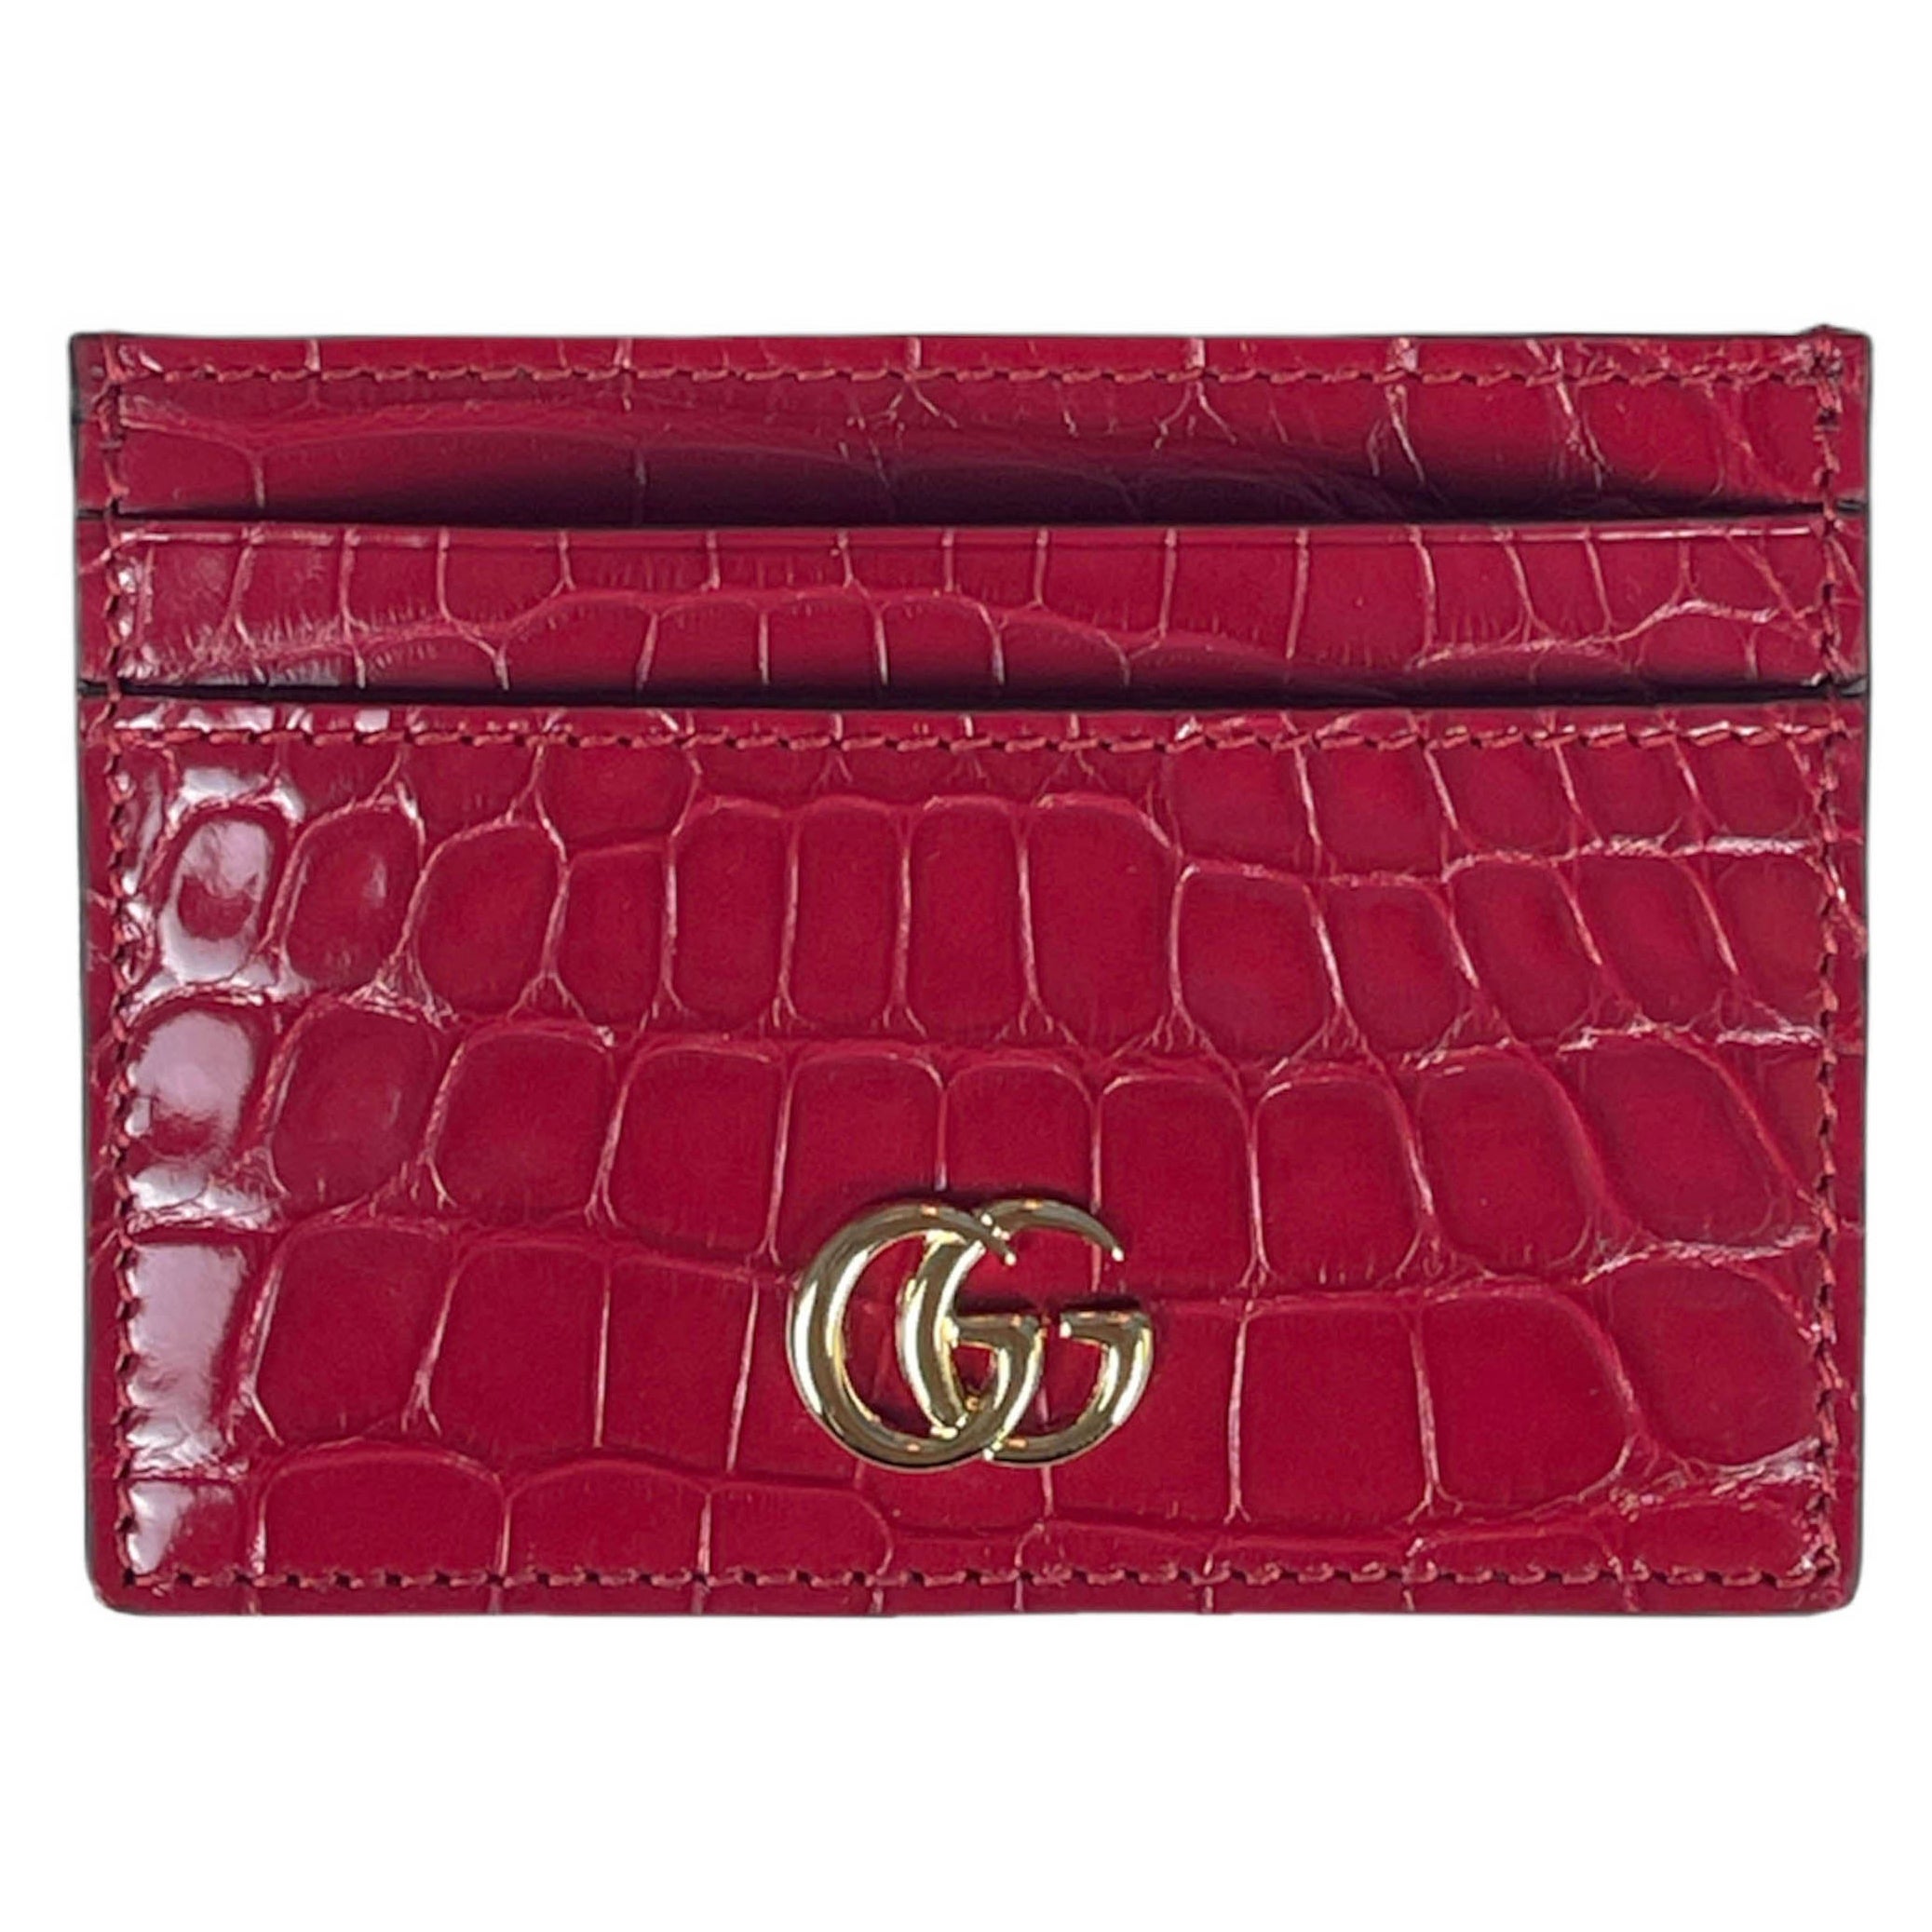 Gucci Unisex Red Alligator Skin GG Logo Marmont Card Case Wallet LIKE NEW w/ BOX